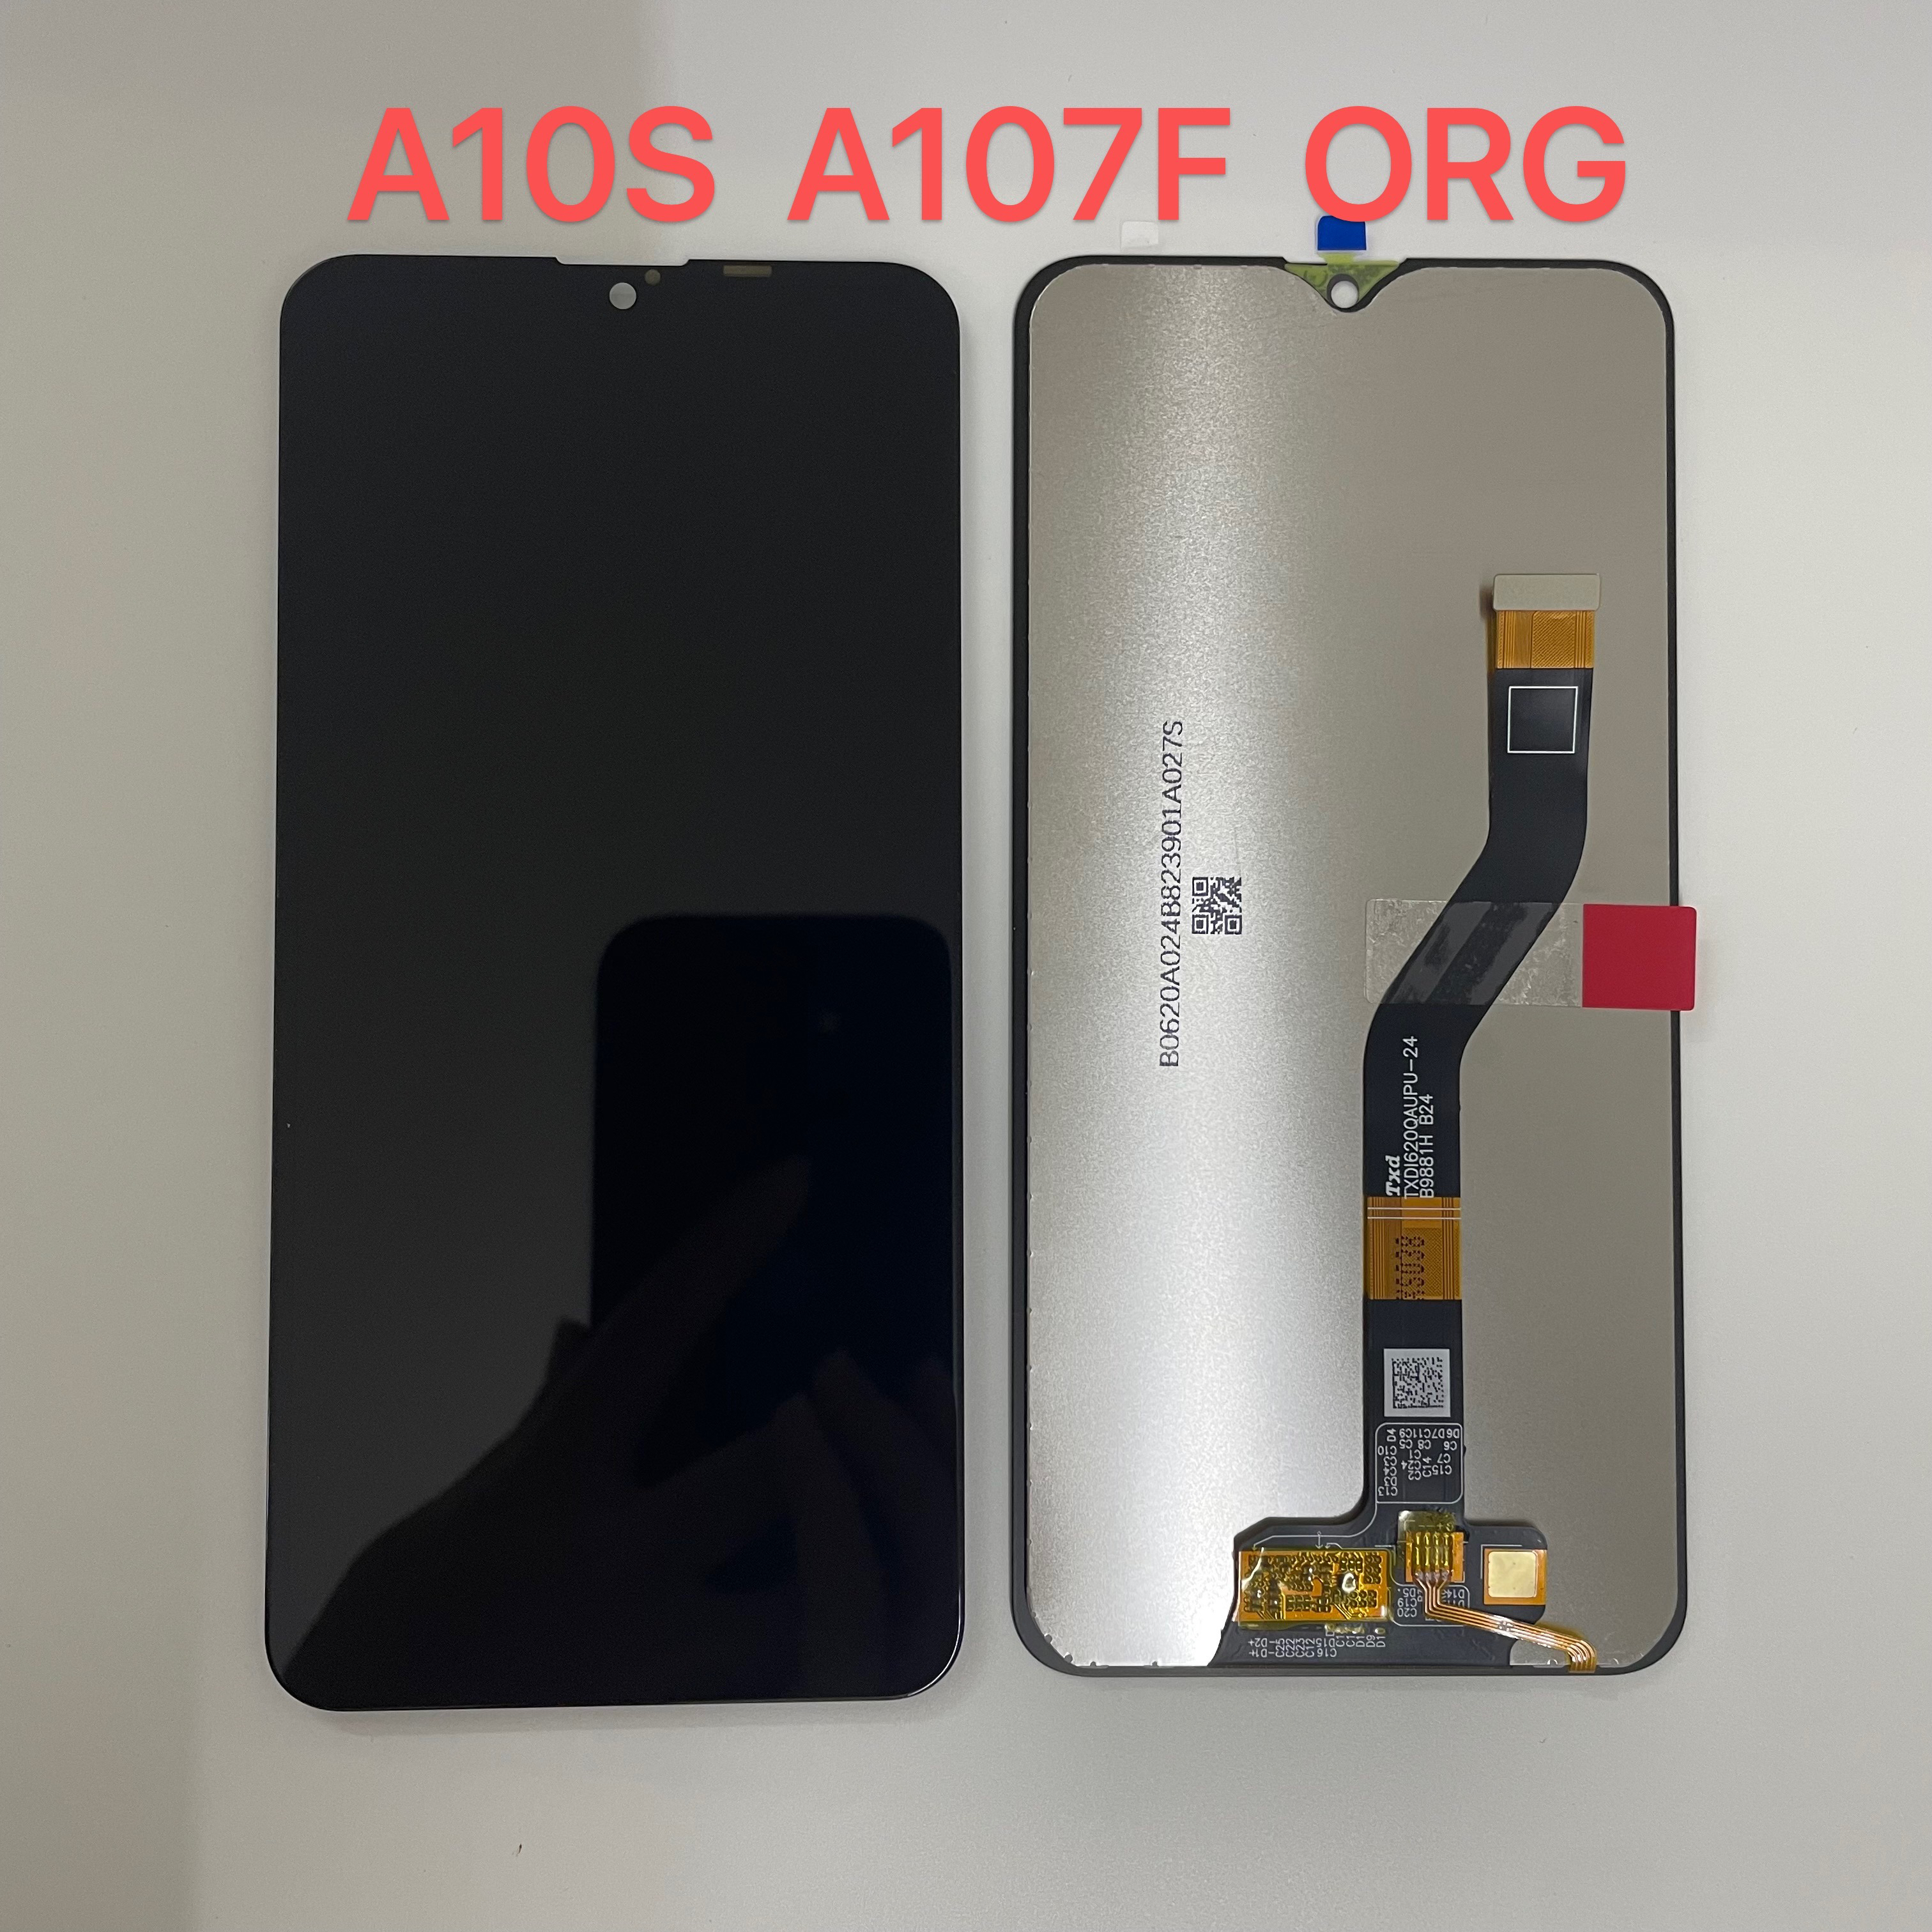 For Samsung A10S ORG Lcd Screen display and Lcd Screen replacement